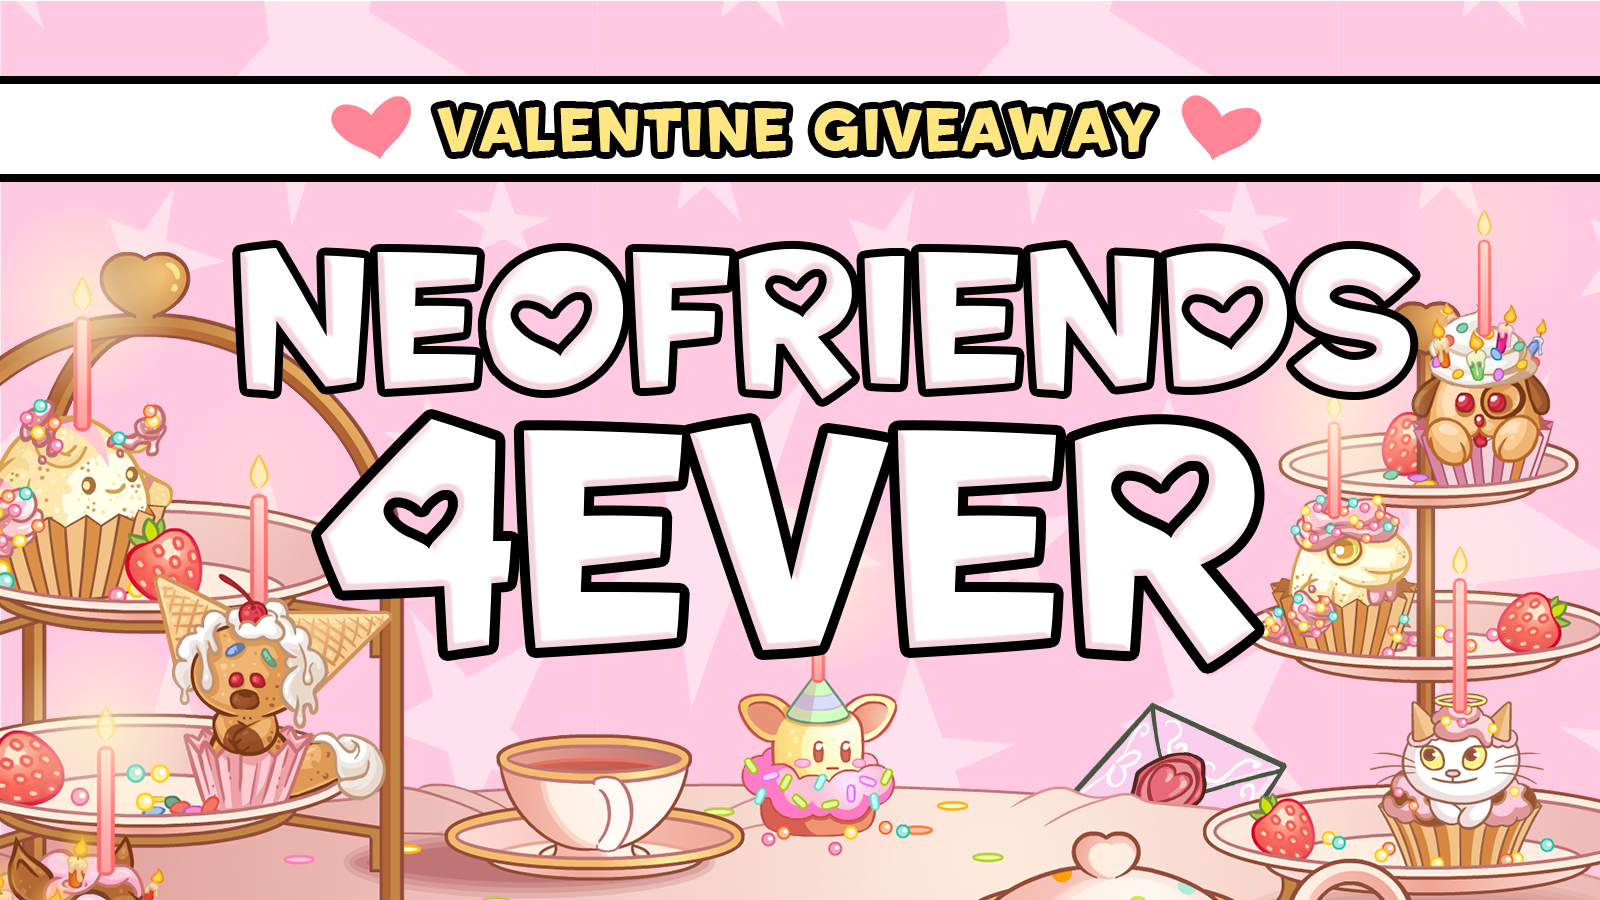 https://images.neopets.com/images/nf/valentines-giveaway.png